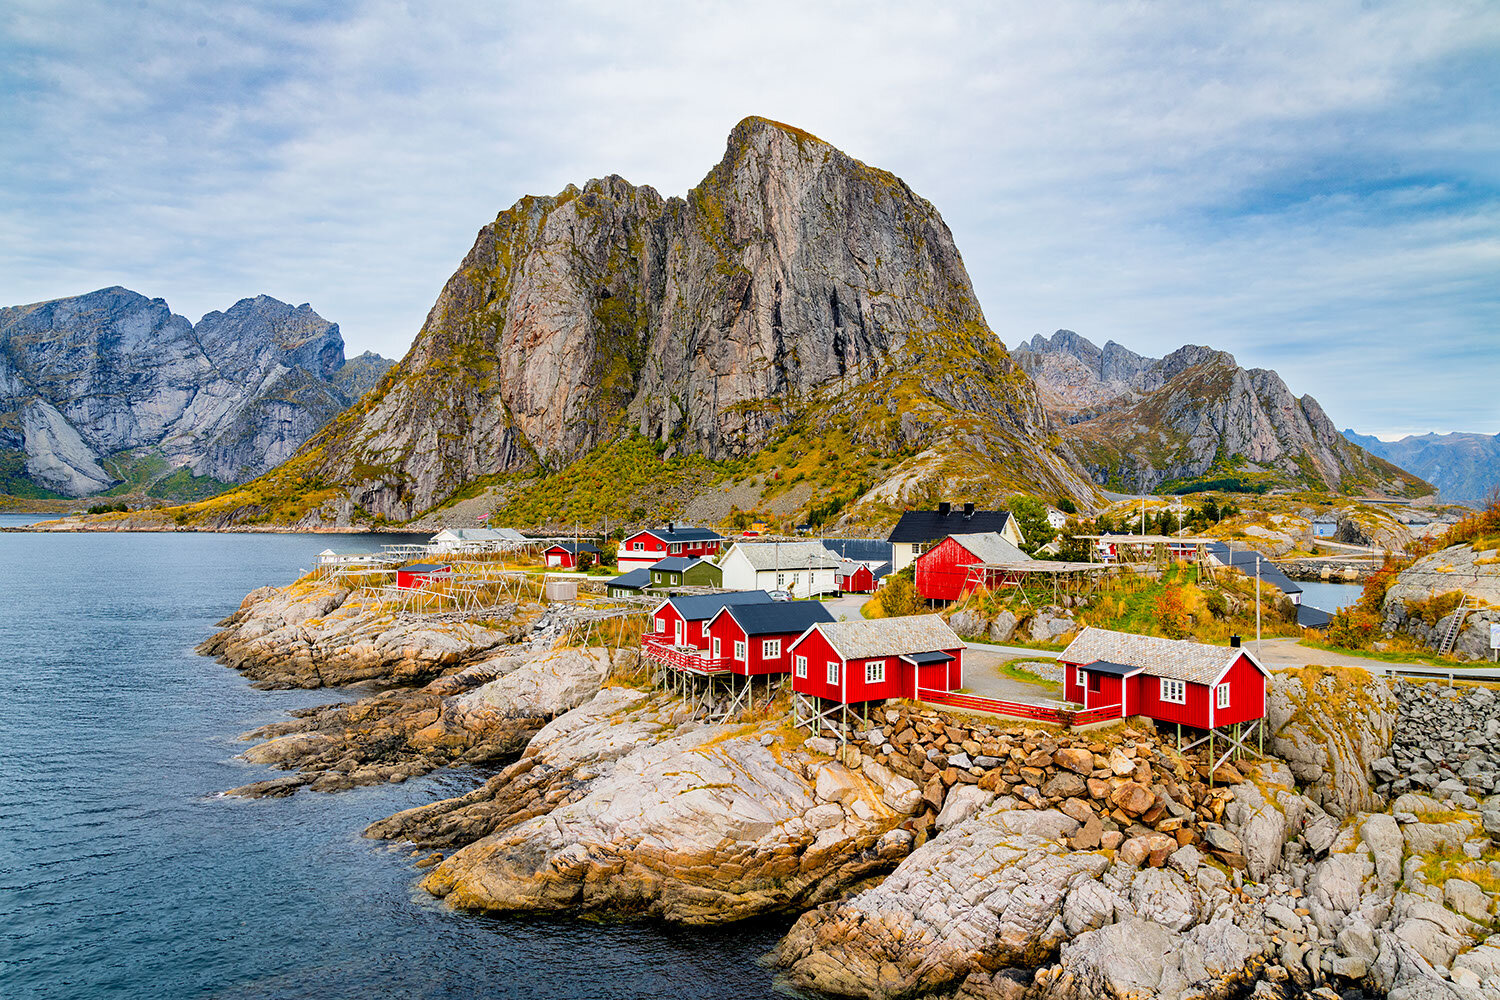 One of the most iconic locations on Lofoten captured with the Nikon D850